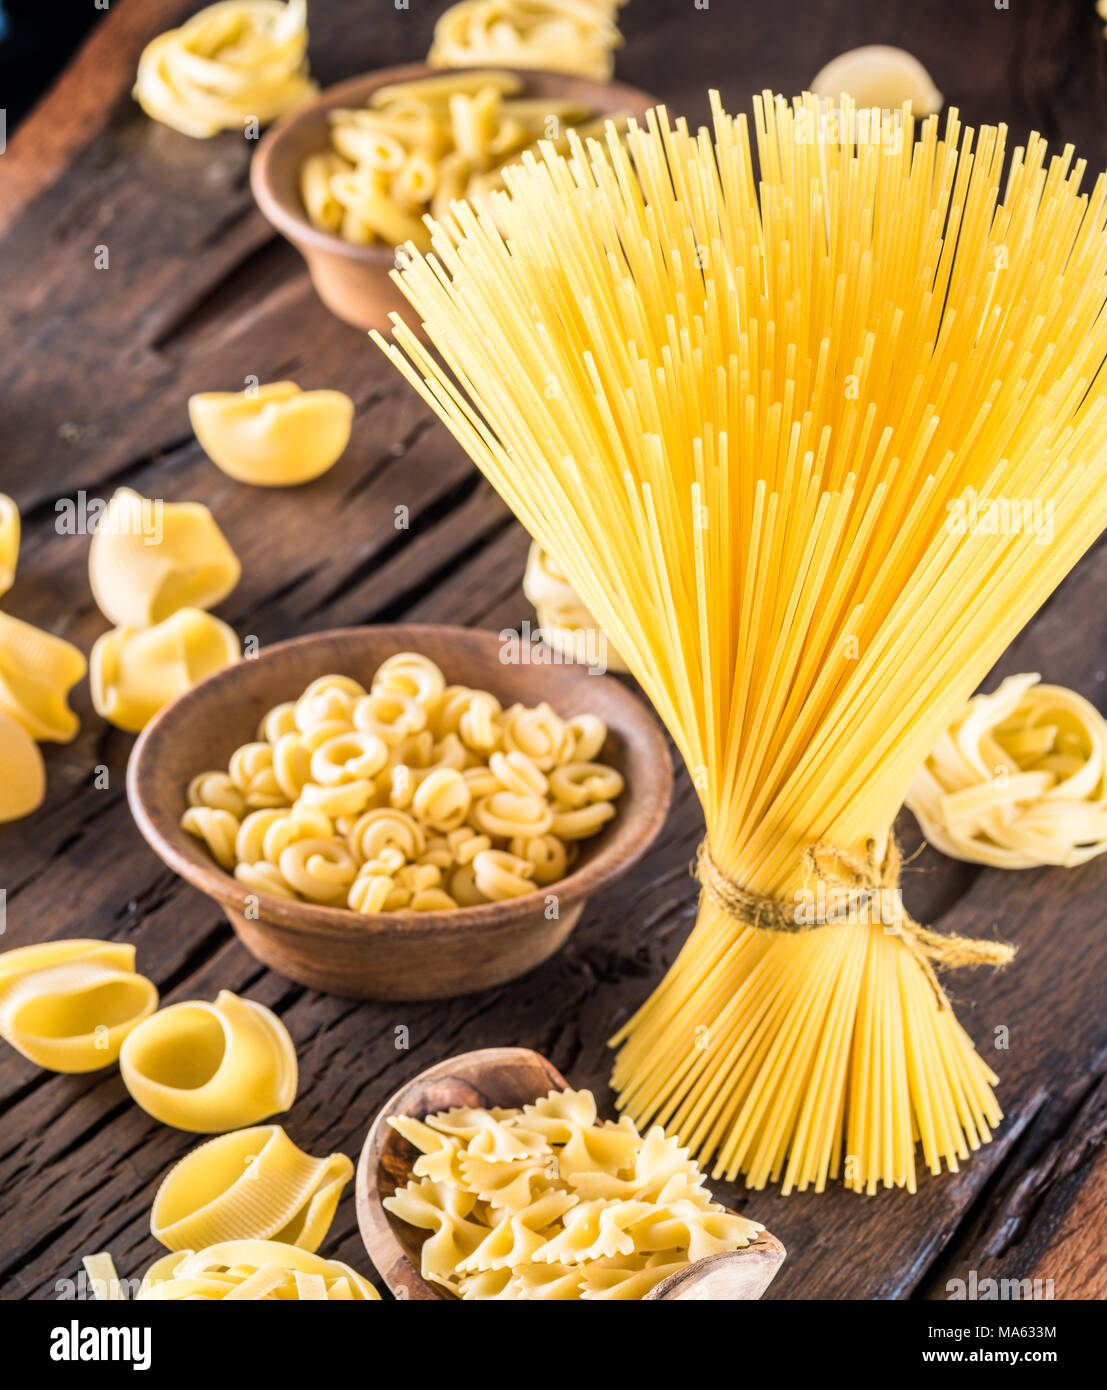 Different pasta types on wooden table. Stock Photo